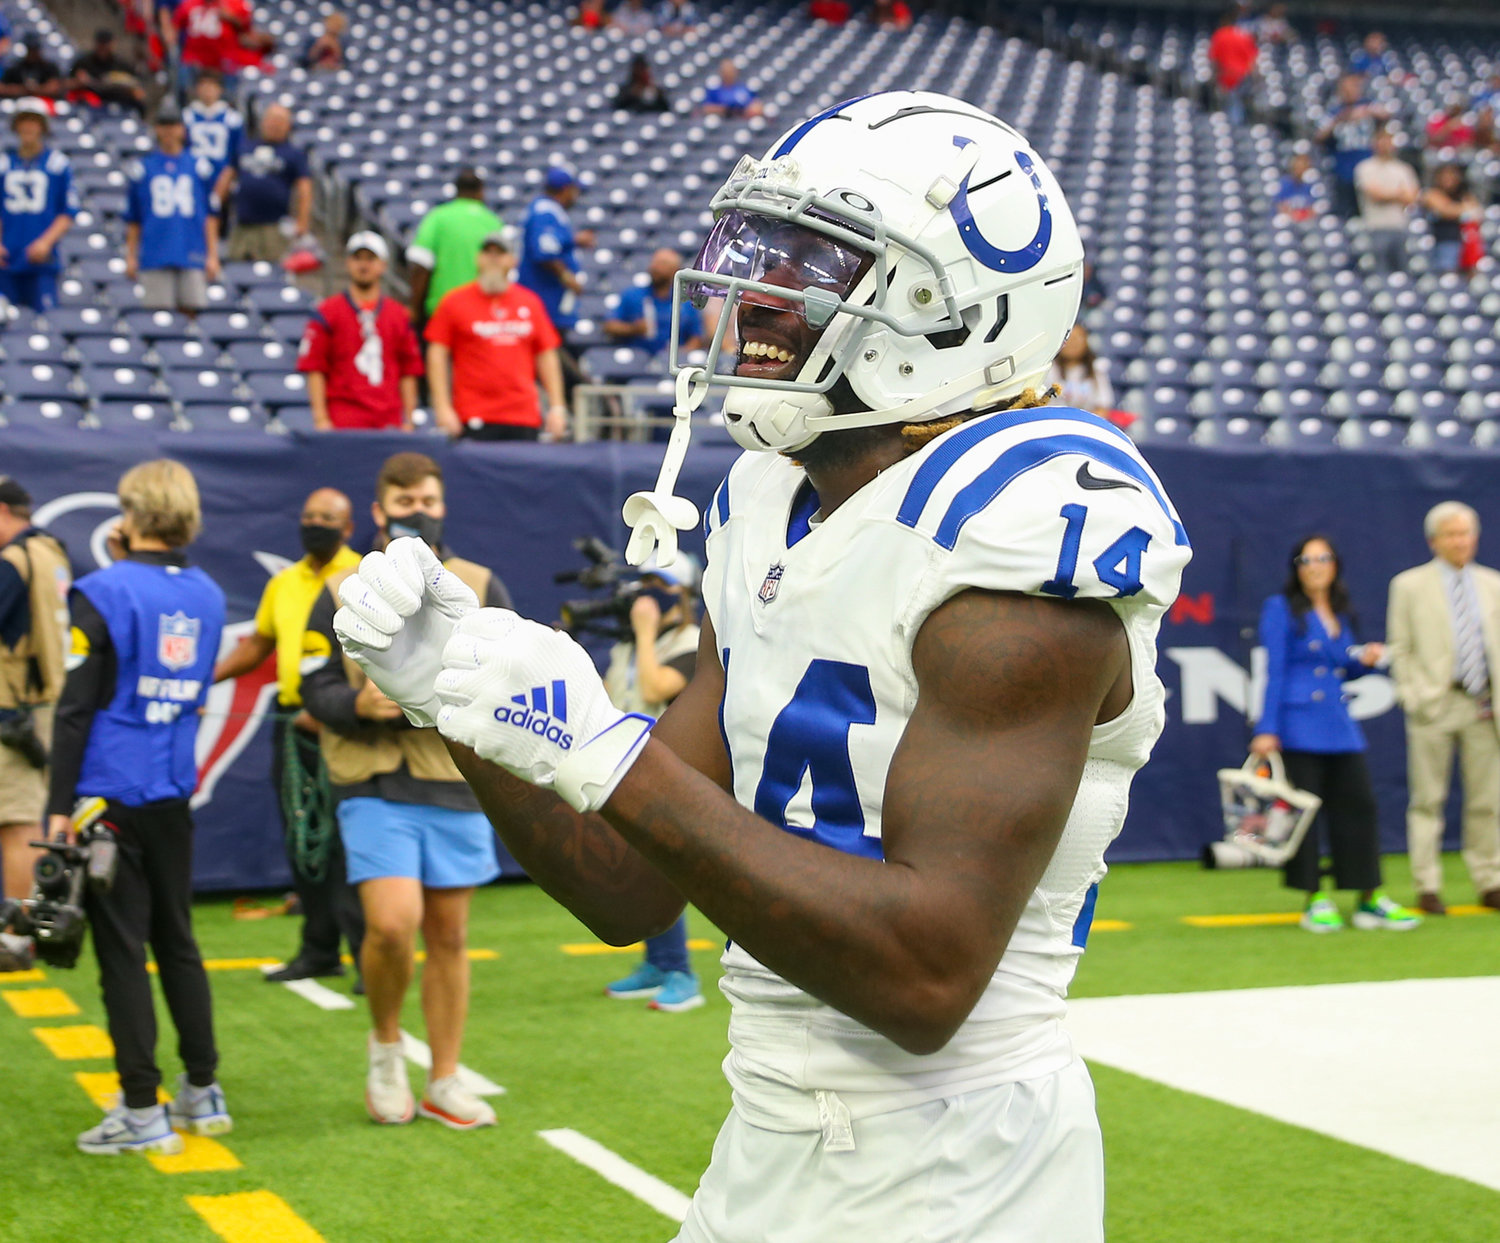 Indianapolis Colts wide receiver Zach Pascal (14) plays catch with fans before the start of an NFL game between the Texans and the Colts on December 5, 2021 in Houston, Texas.